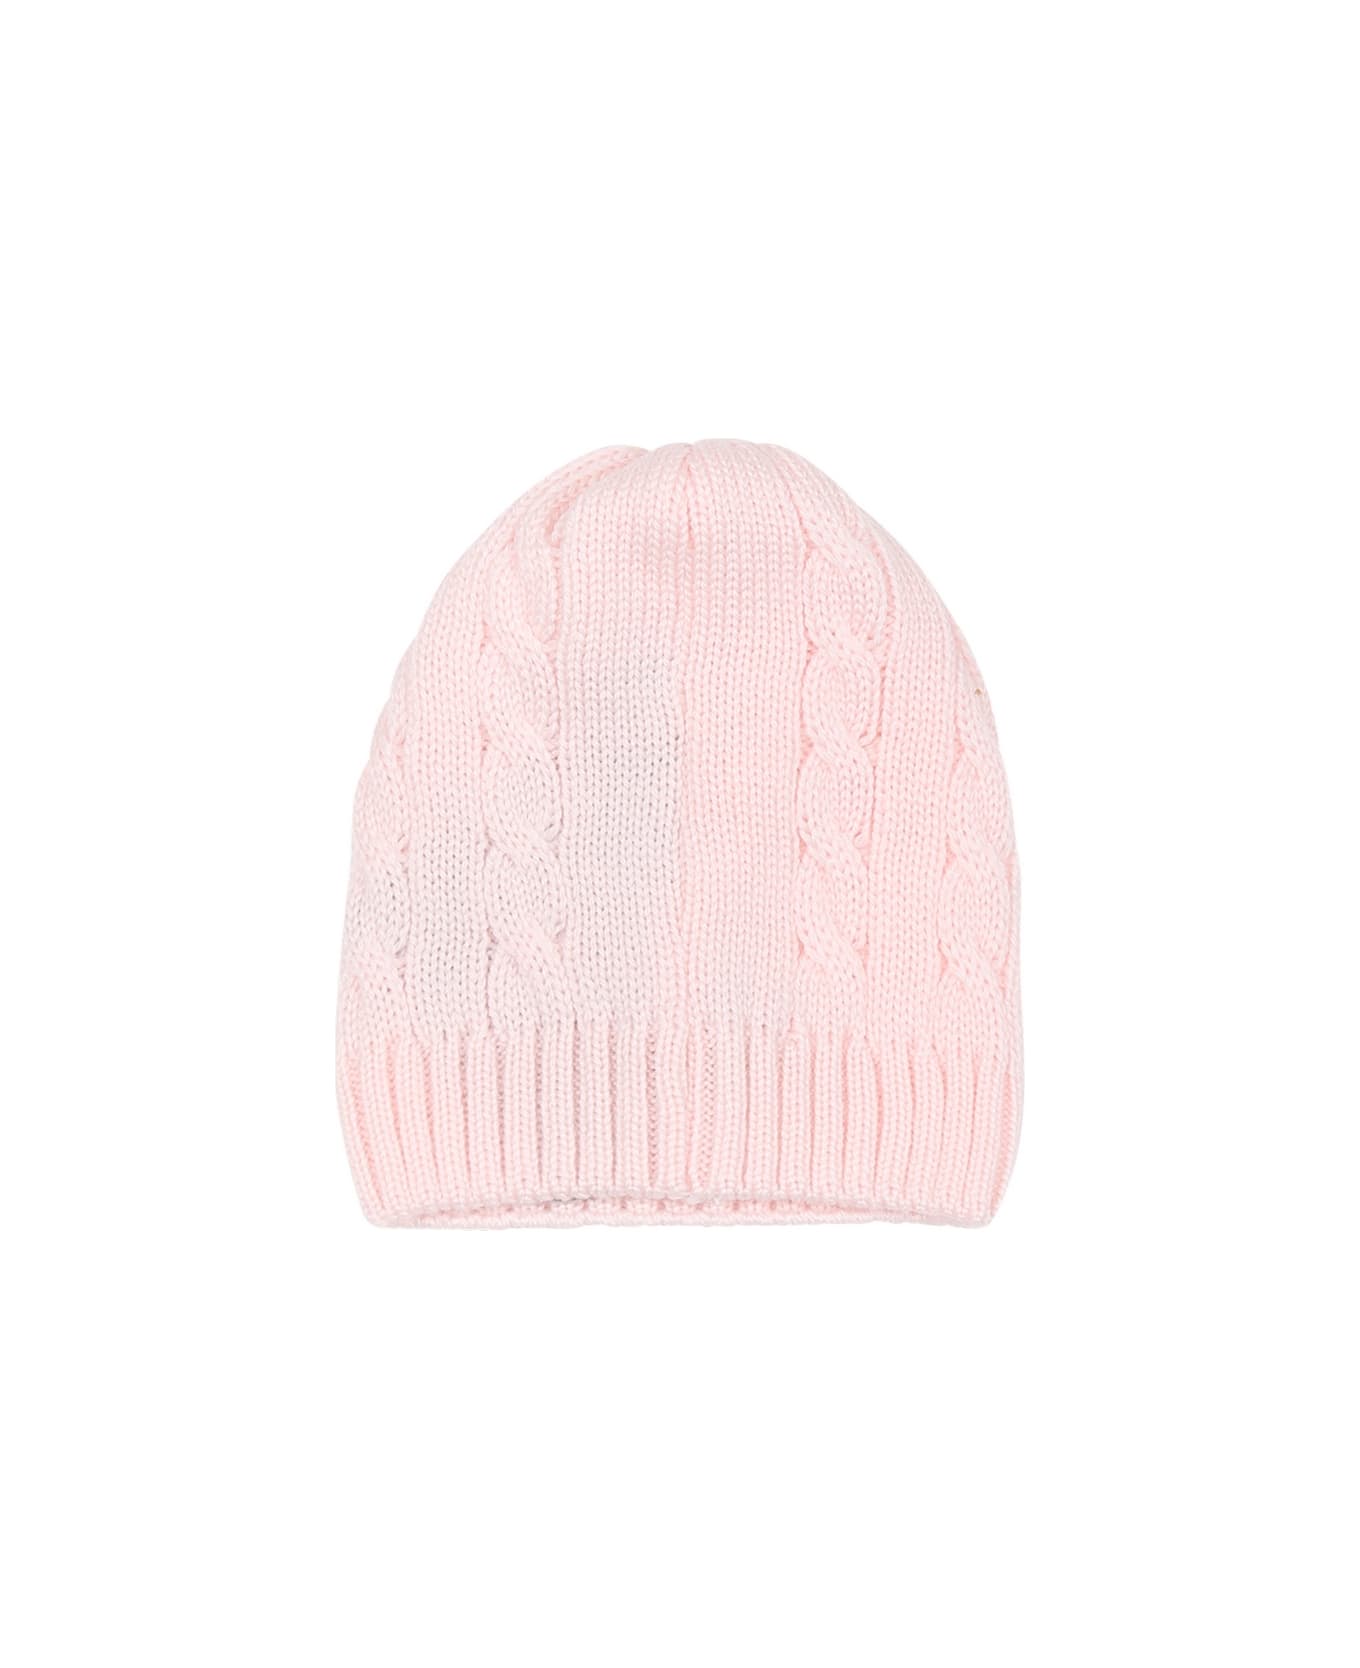 Little Bear Pink Hat For Baby Girl - Cipria アクセサリー＆ギフト